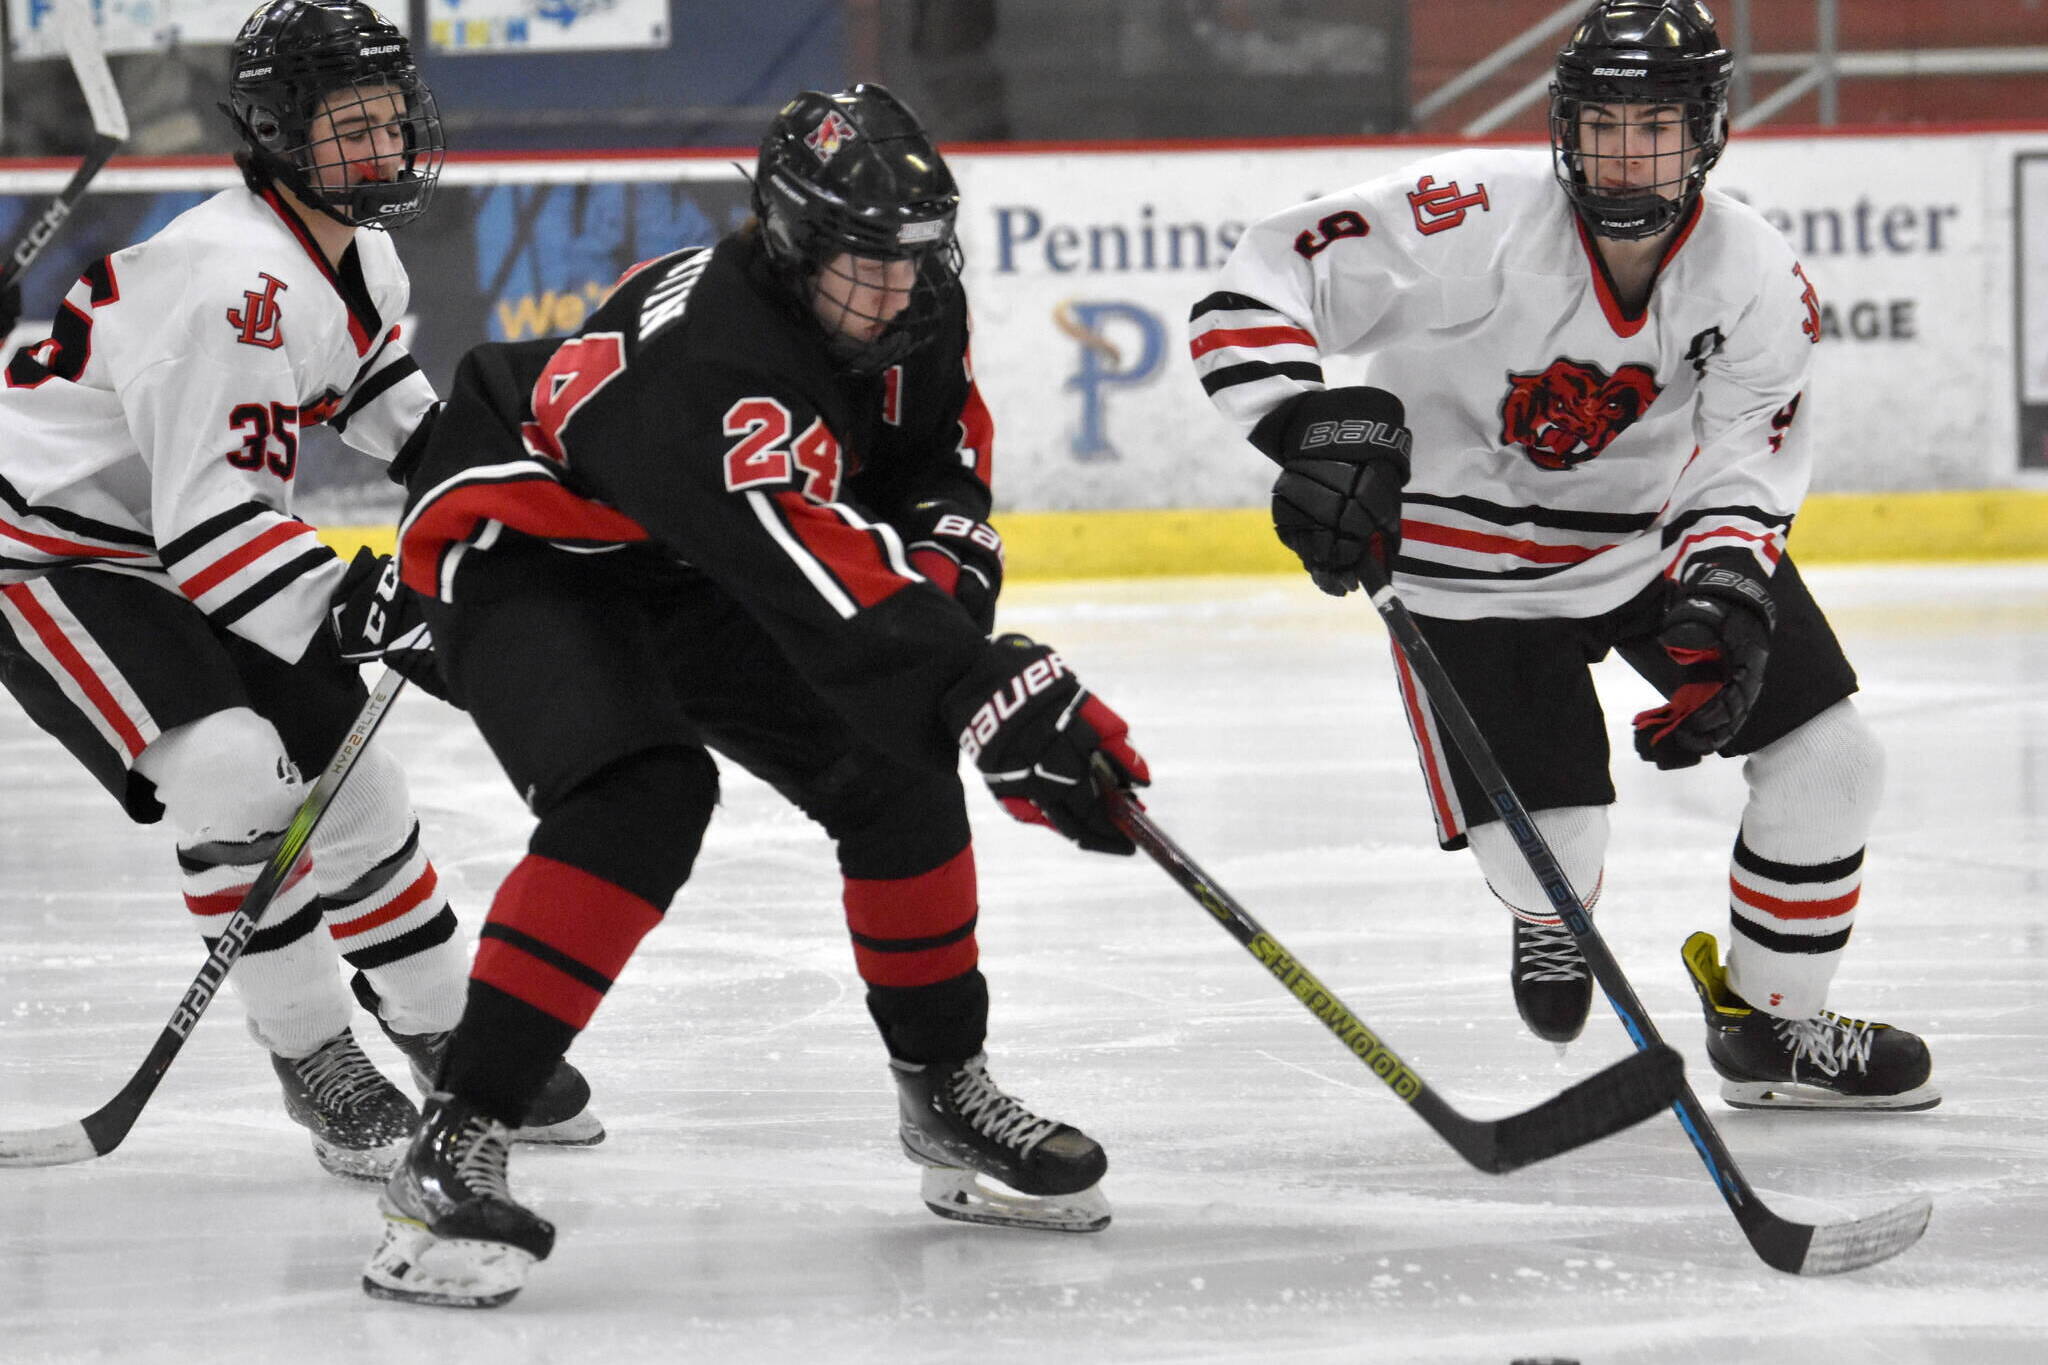 Kenai Central’s Avery Martin tries to split Juneau-Douglas High School: Yadaa.at Kale’s Dylan Sowa and Camden Kovach on Thursday at the Division II state hockey tournament at the Soldotna Regional Sports Complex in Soldotna. (Photo by Jeff Helminiak/Peninsula Clarion)